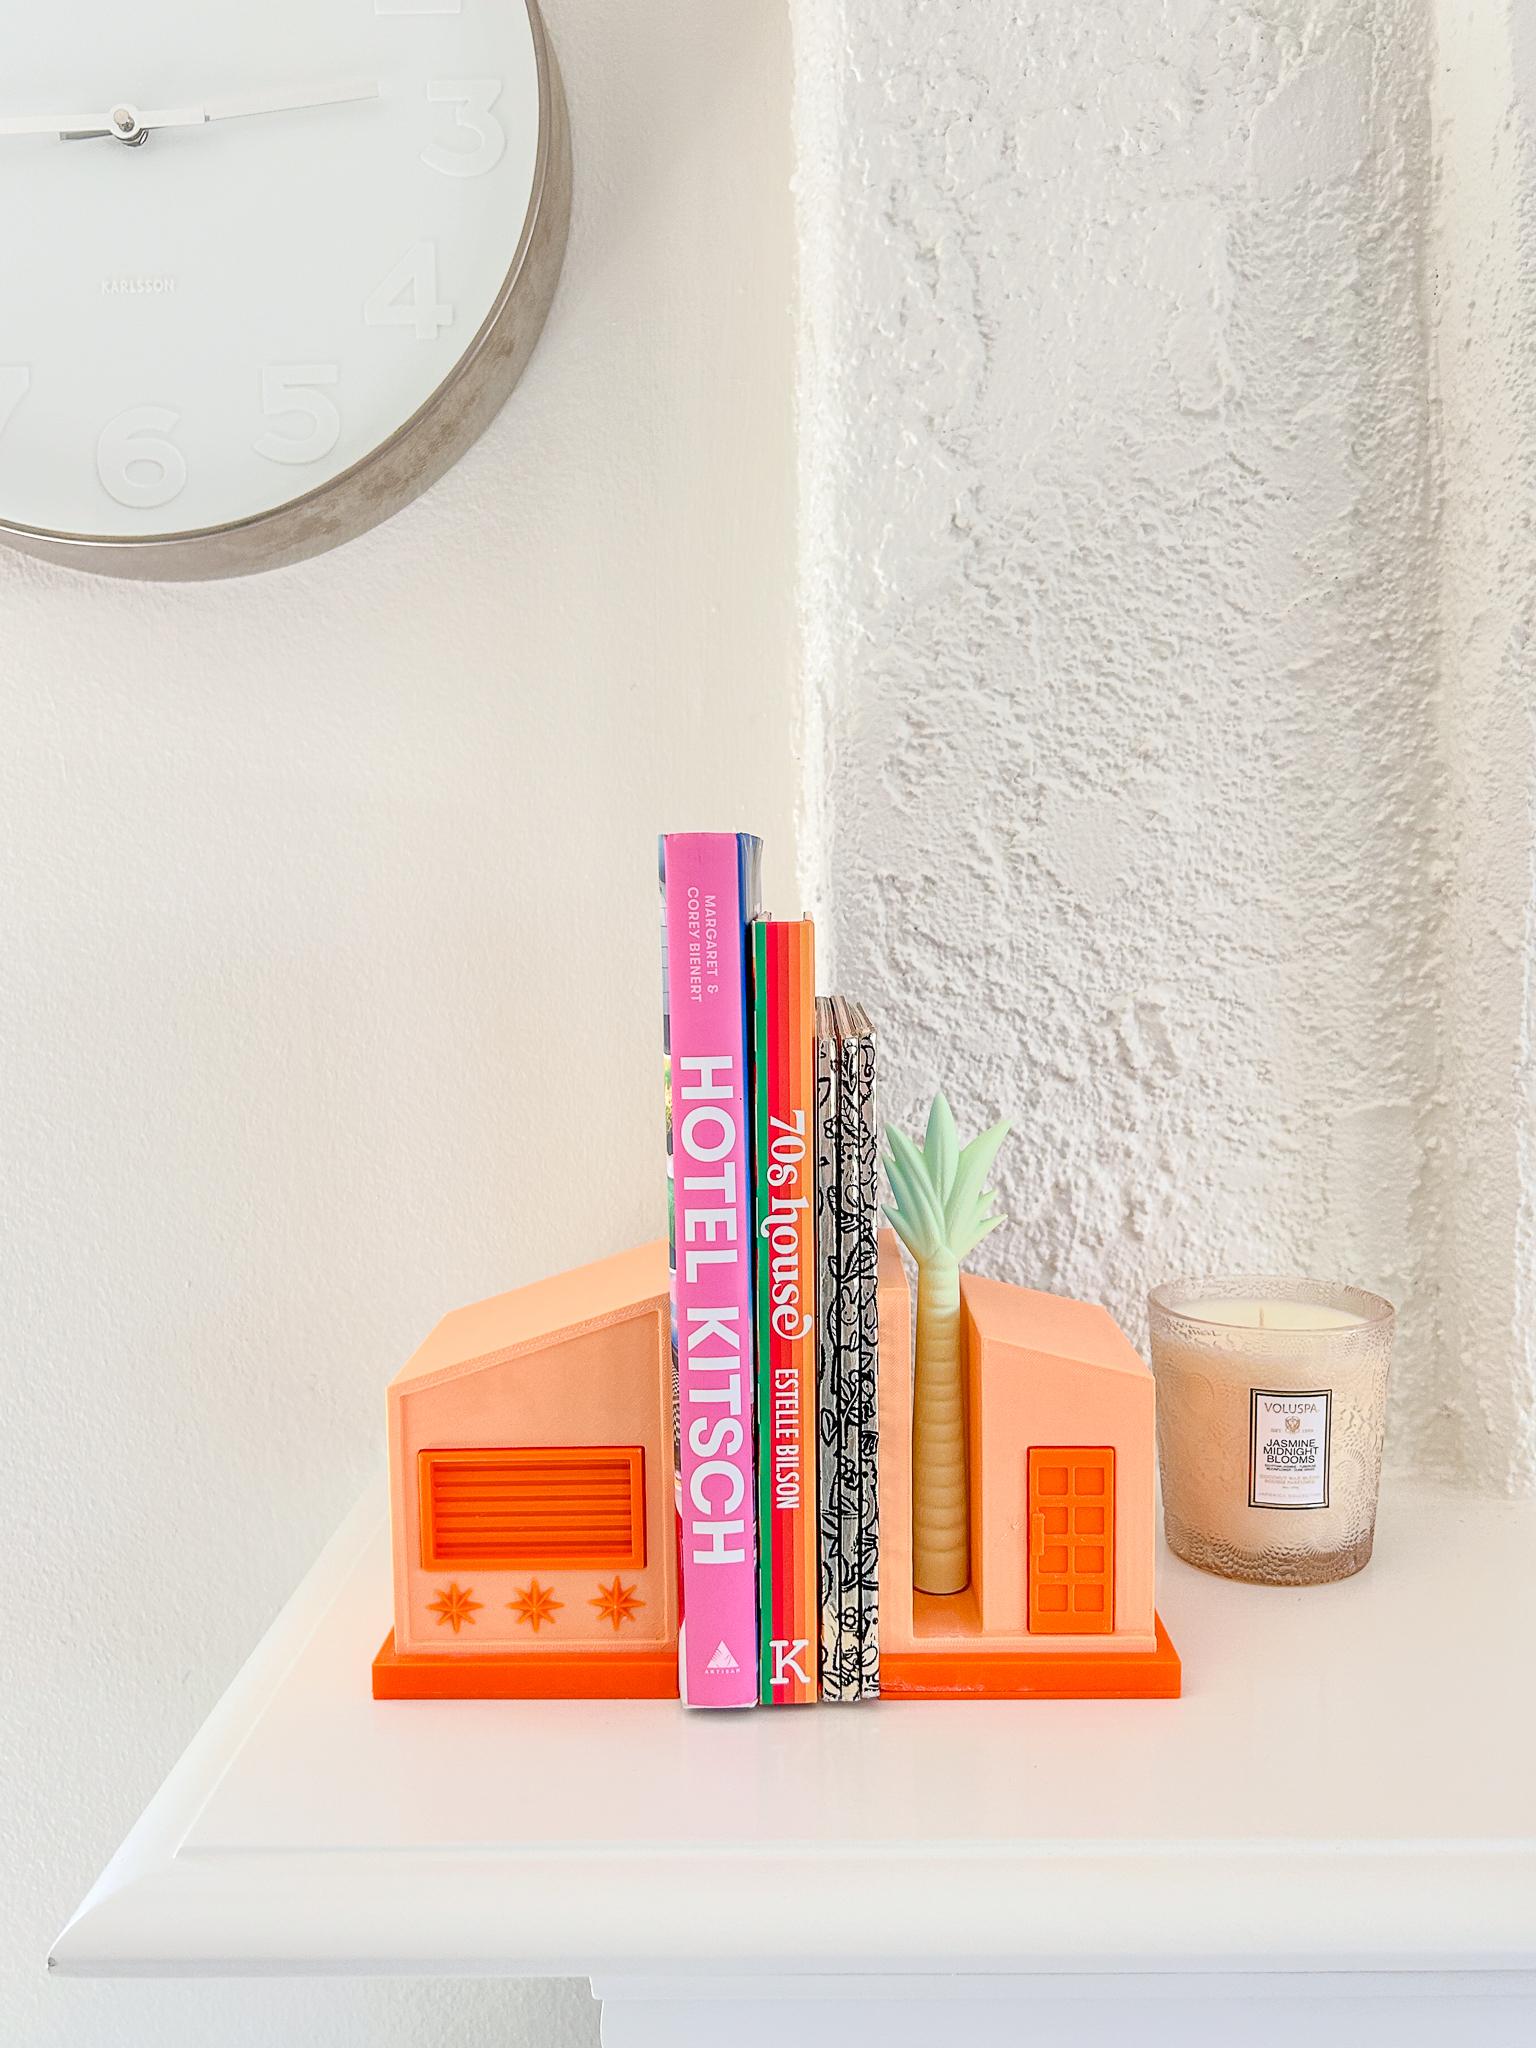 🌴 New Release Alert: Transform Your Space with the Midcentury Skillion Roof House Bookend!